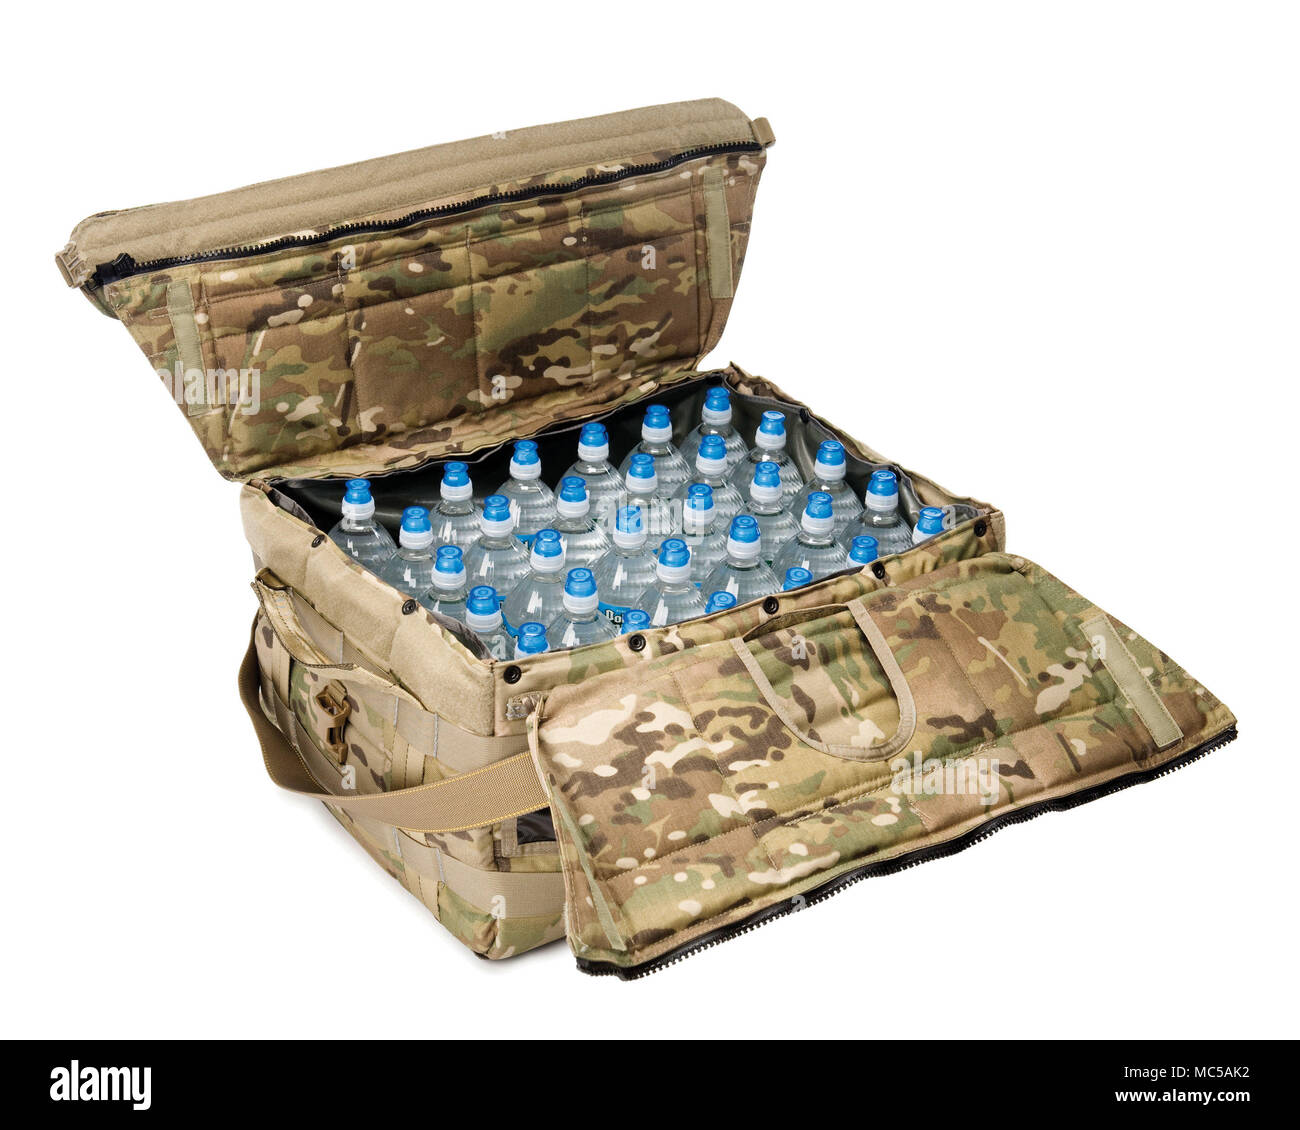 This insulated container for cold beverages, a high-tech ice chest that keeps water bottles cool far longer than existing ice chests, is one of 112 technologies developed by NSRDEC that are available for licensing. (U.S. Army photo by David Kamm, NSRDEC) Stock Photo